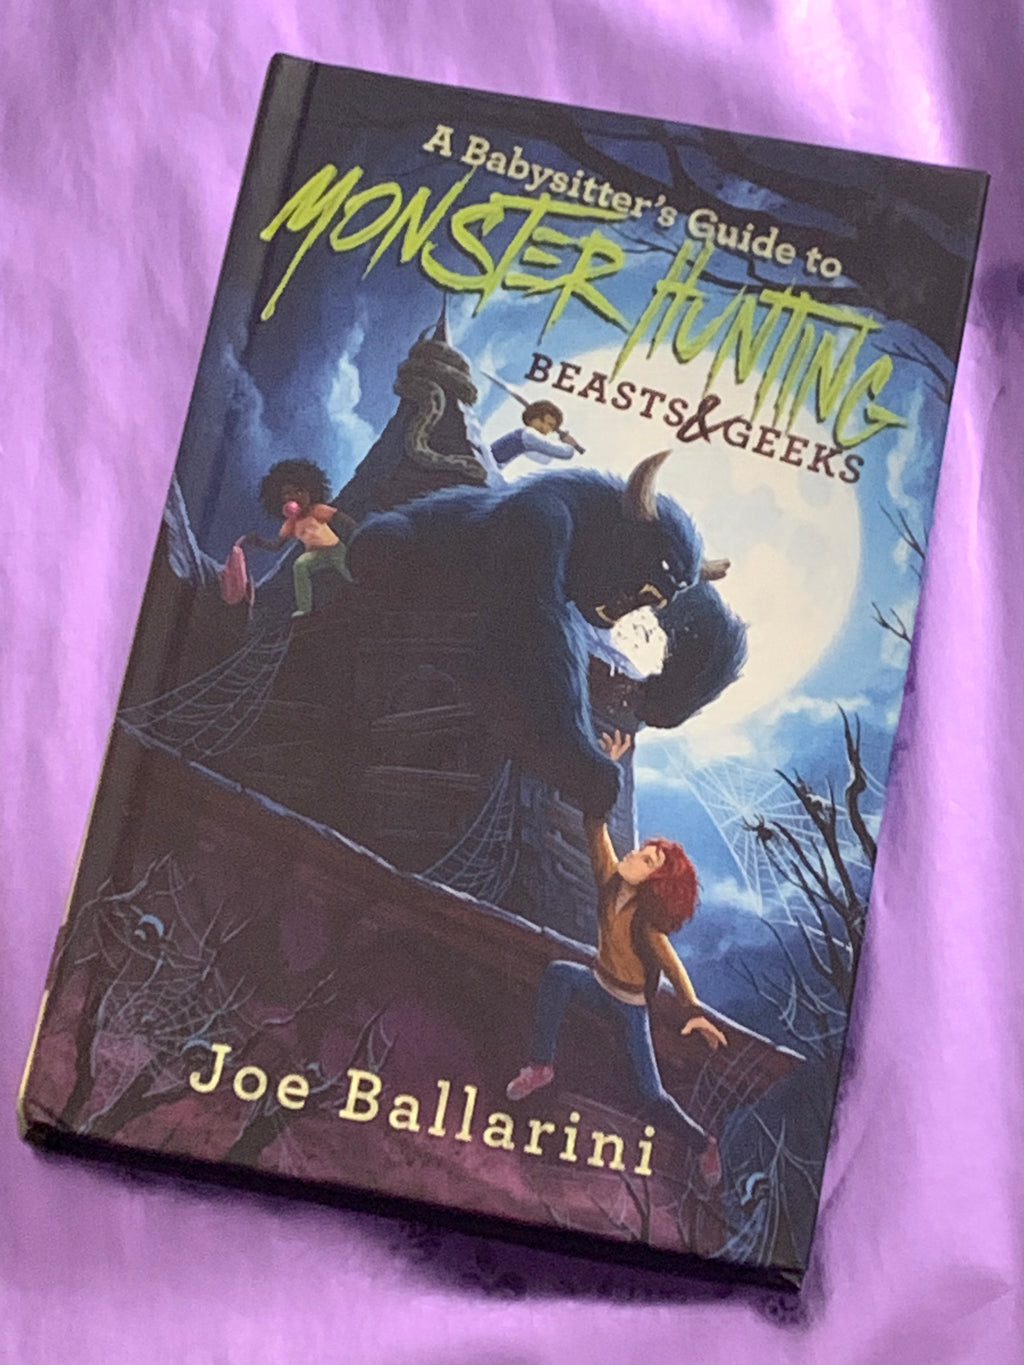 A Babysitter's Guide to Monster Hunting: Beasts & Geeks- By Joe Ballarini